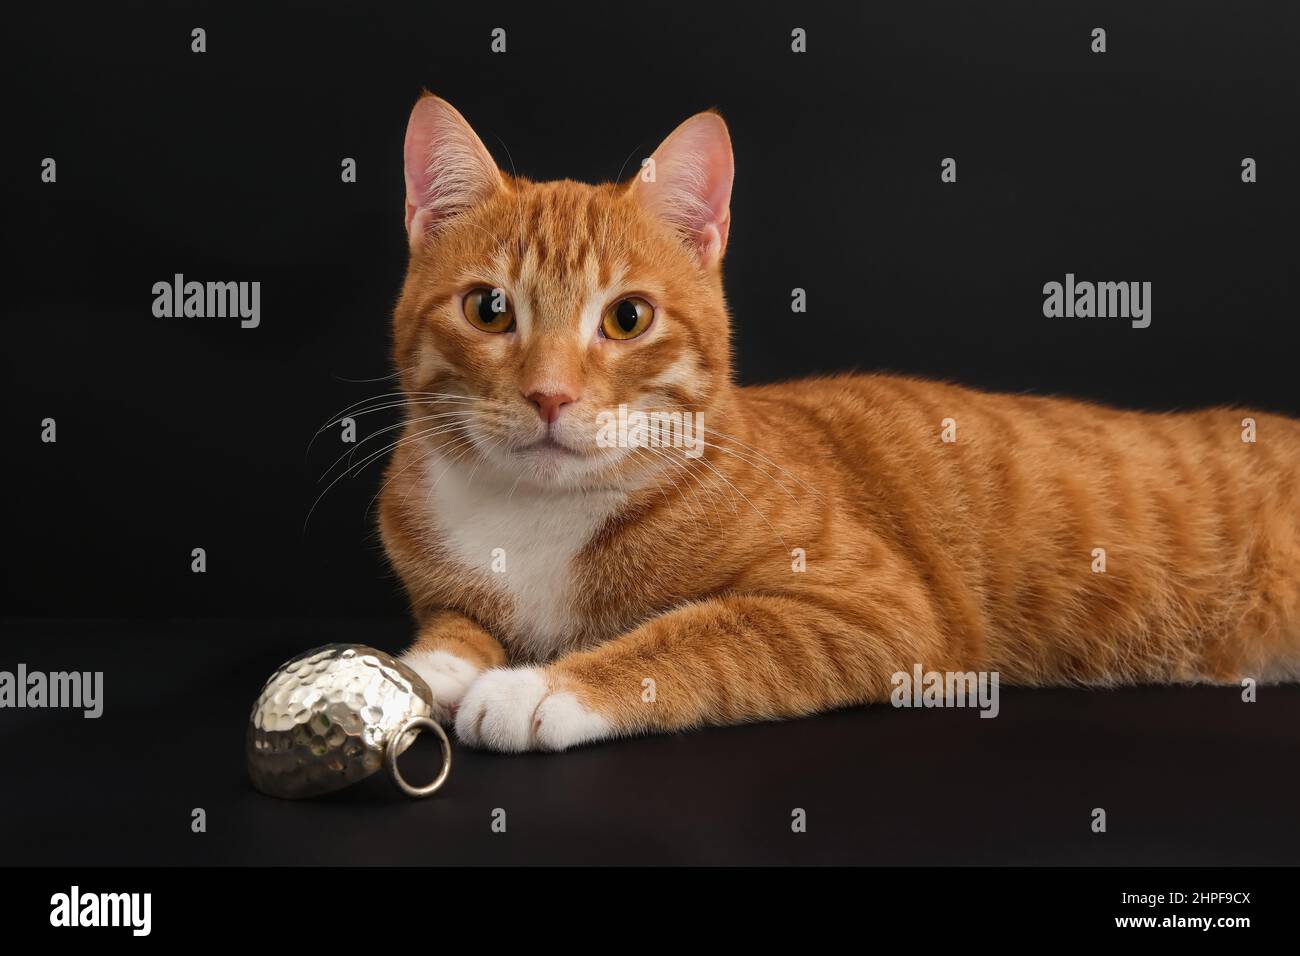 Portrait of young honorable arab ginger tabby cat looking at camera on black background. Pets Stock Photo